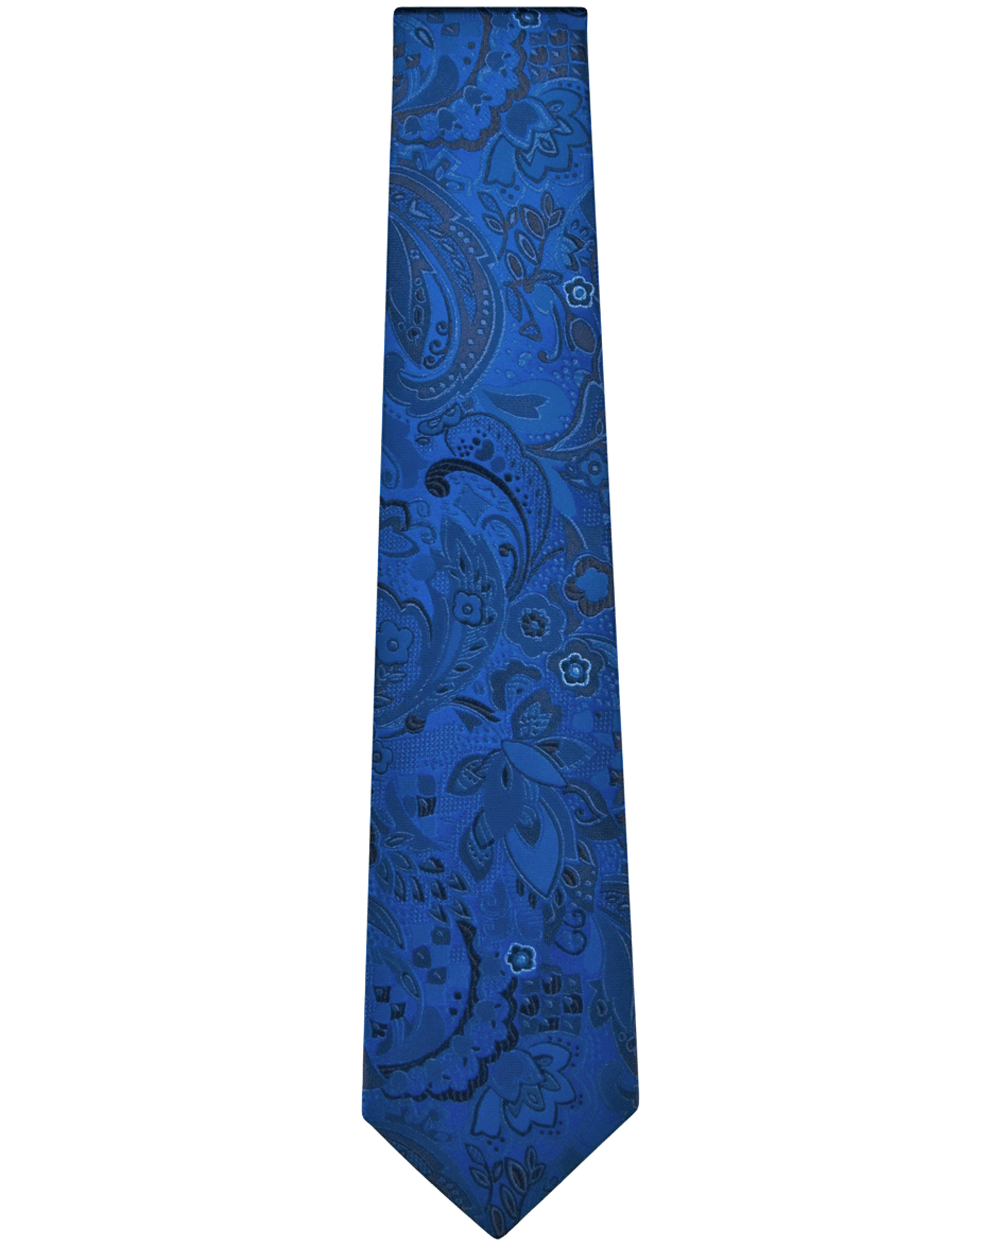 Blue and Bright Blue Paisley Tie